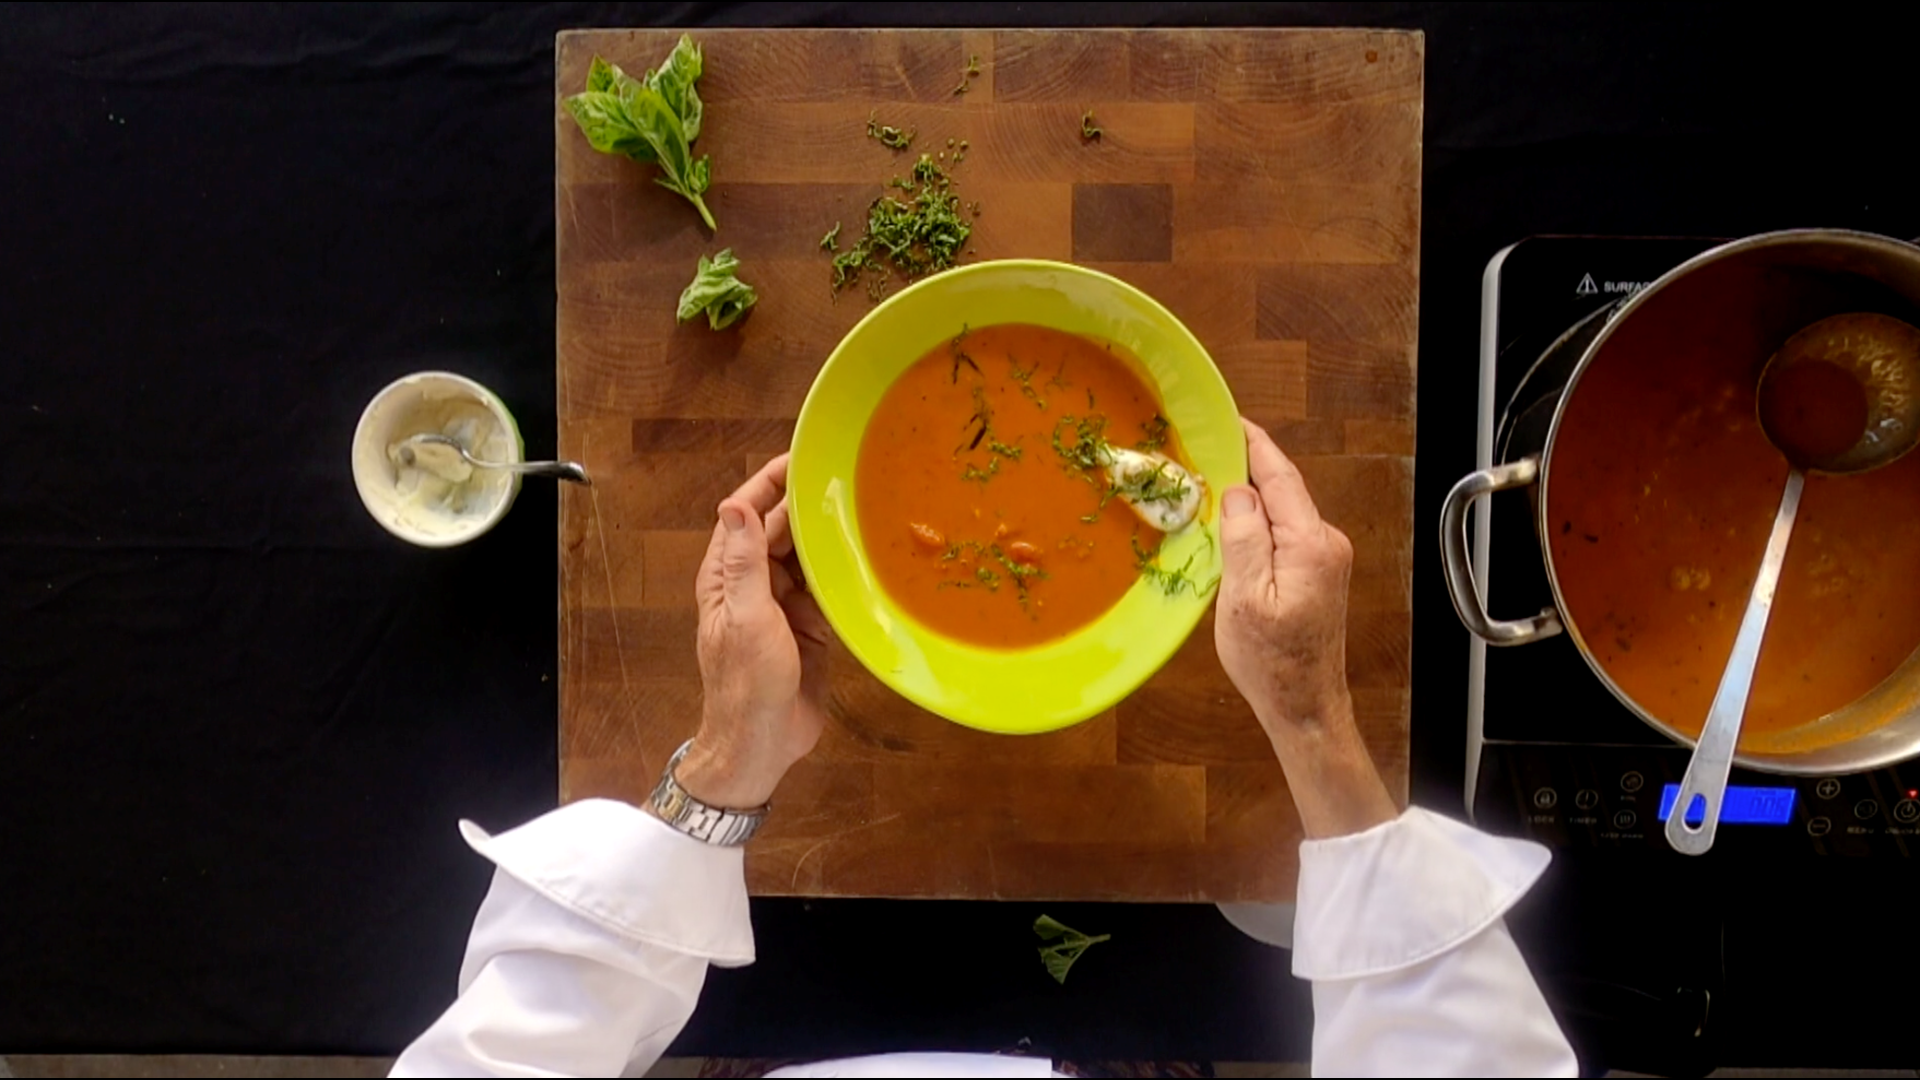 Recipe for CBS 8's Shawn Styles' Tomato Soup